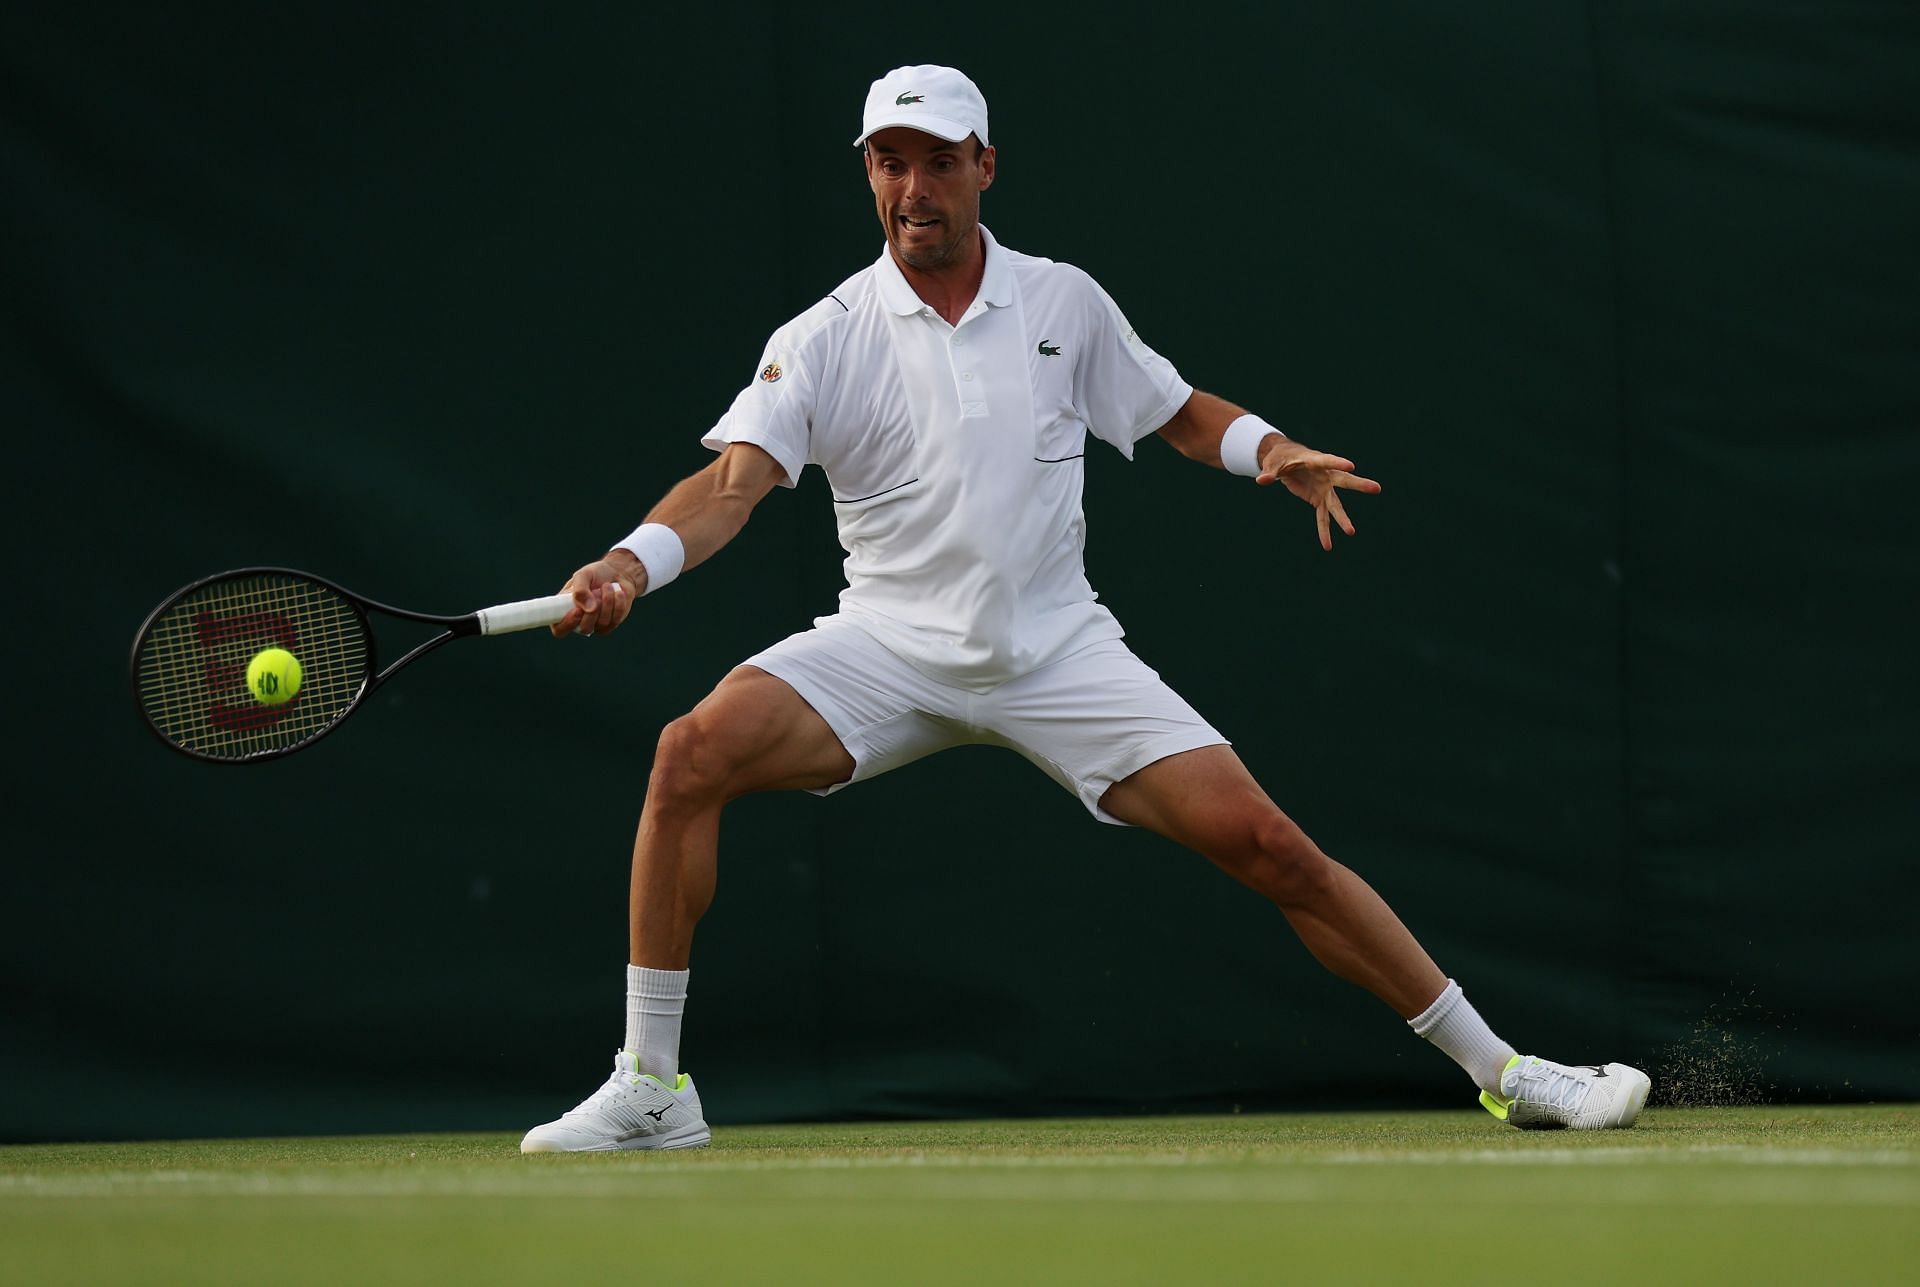 Roberto Bautista Agut won his second title of the year on Saturday